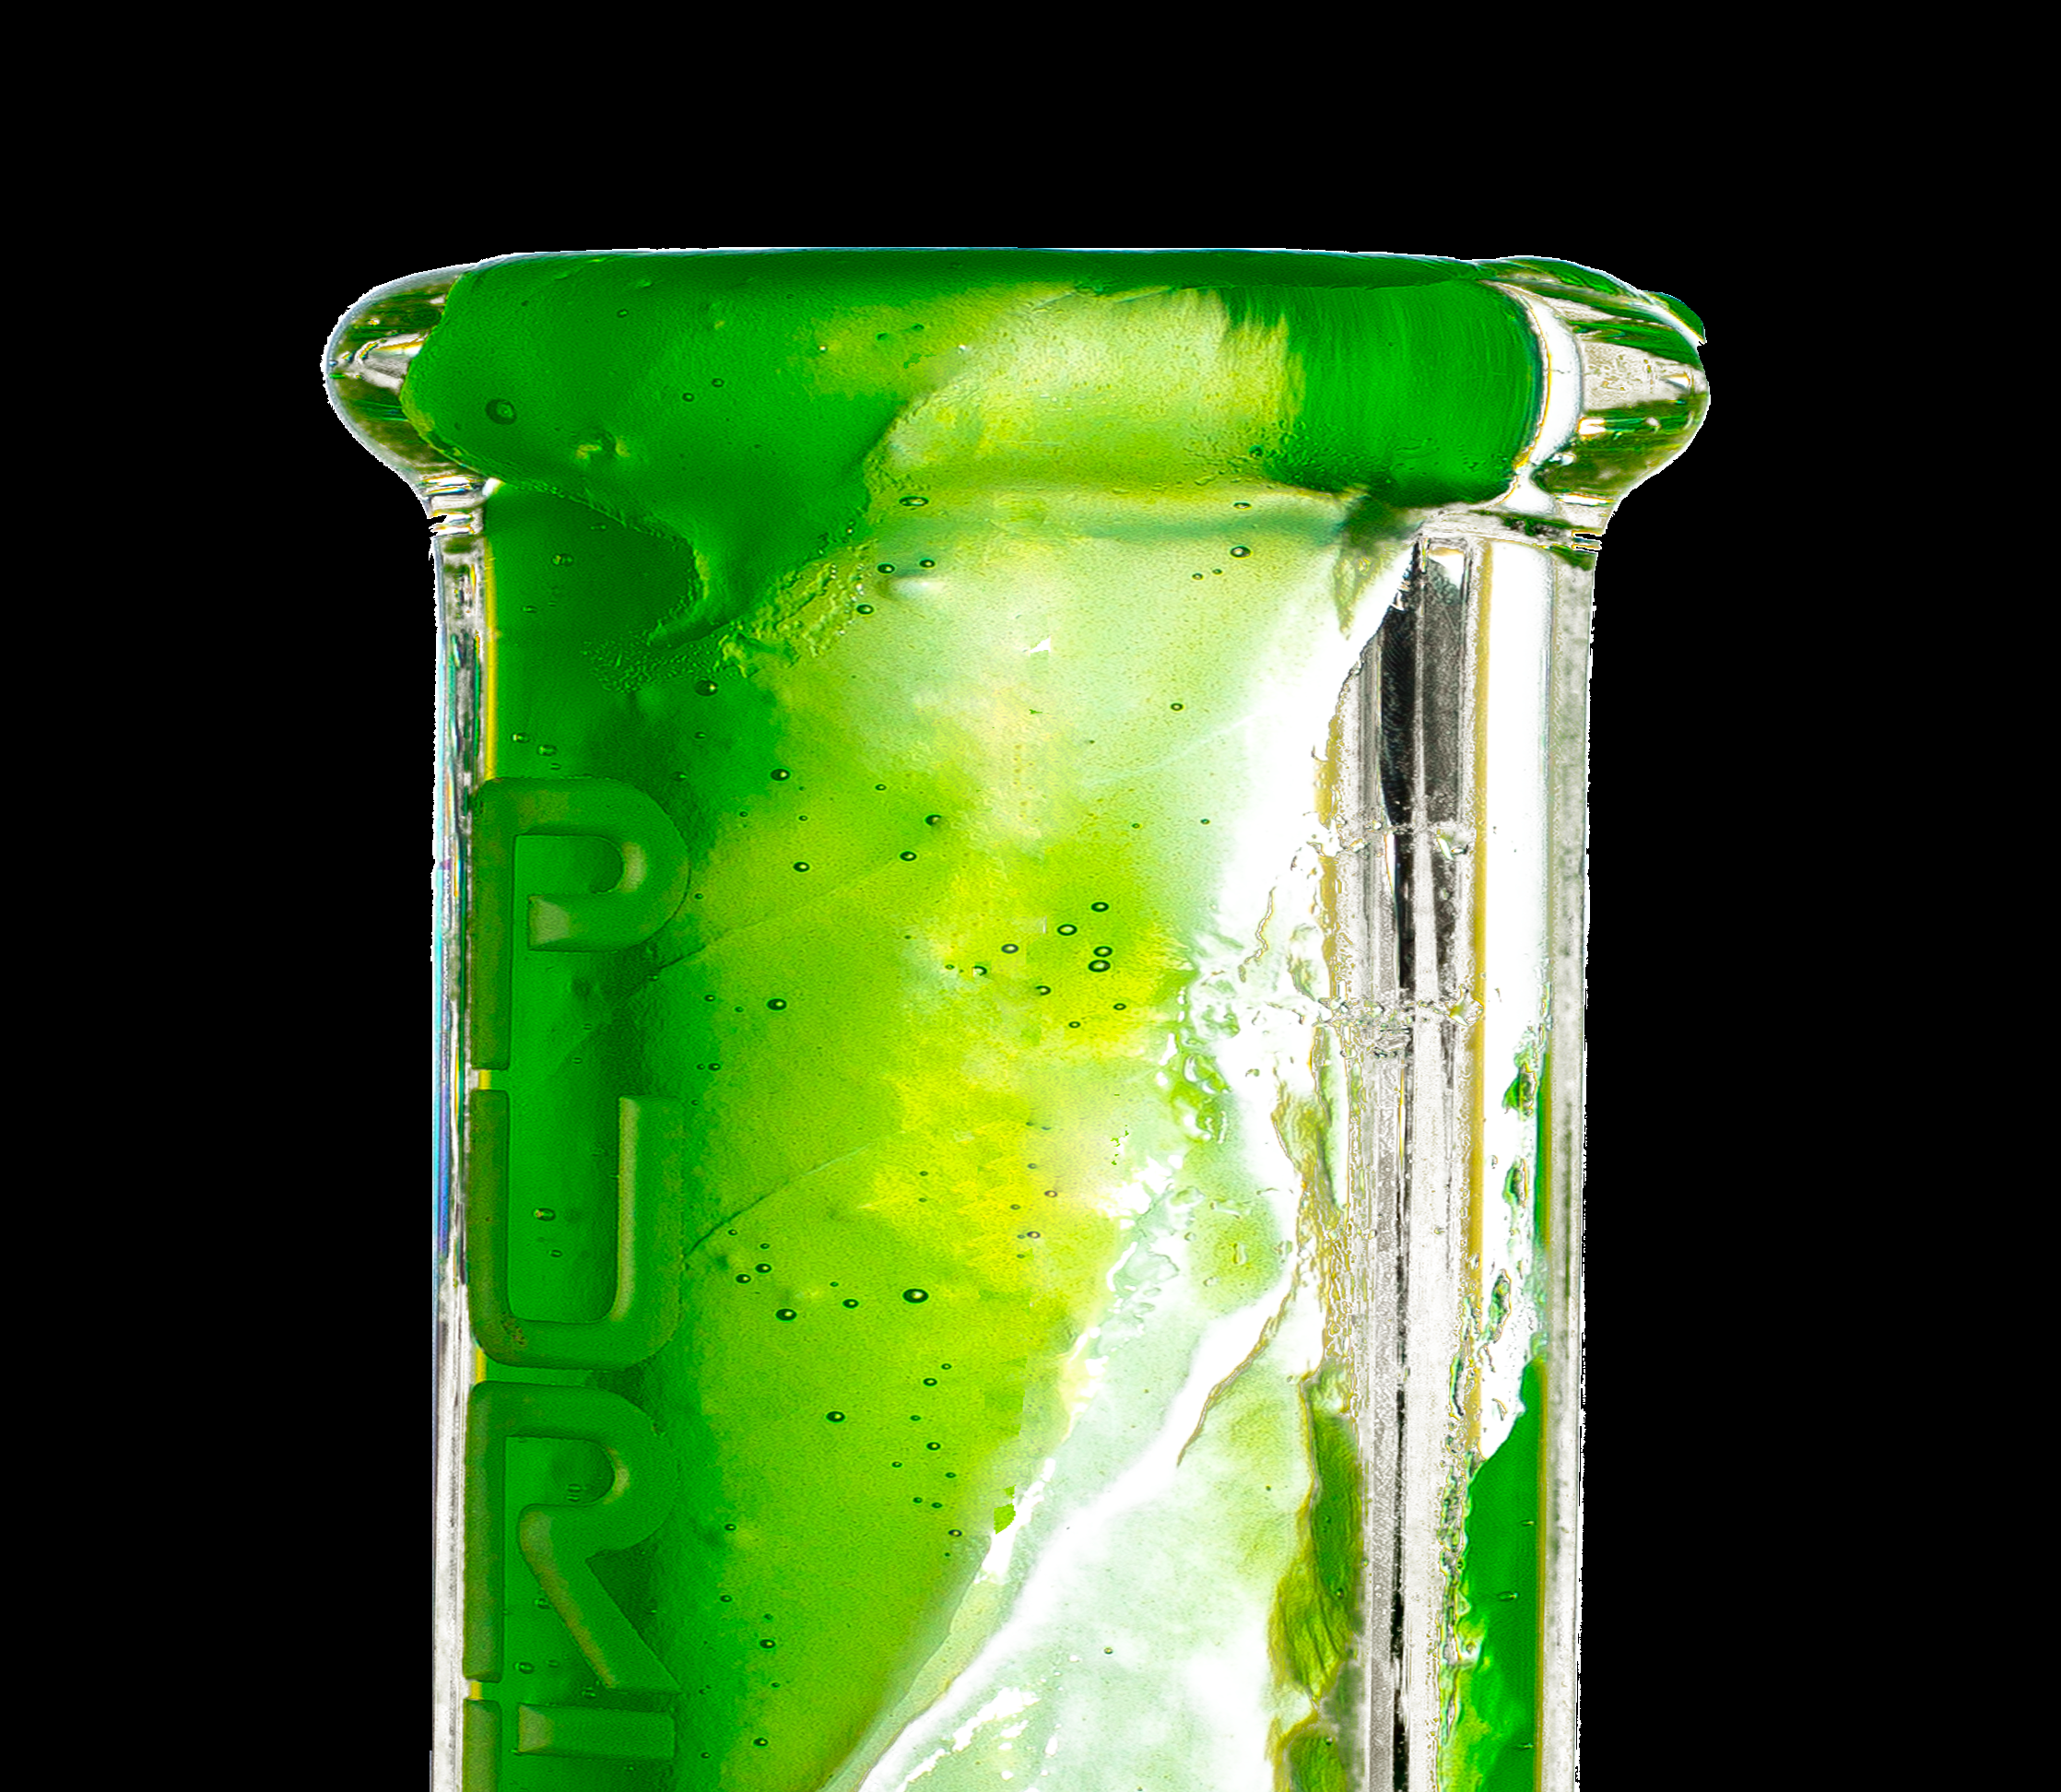 KLEAR Kryptonite Bong Cleaner 270 Case Best Green Bong cleaner KLEAR Kryptonite coating PURE Glass bong. The best 420 and 710 formula cleaner for bong and rigs. Coat relax rinse